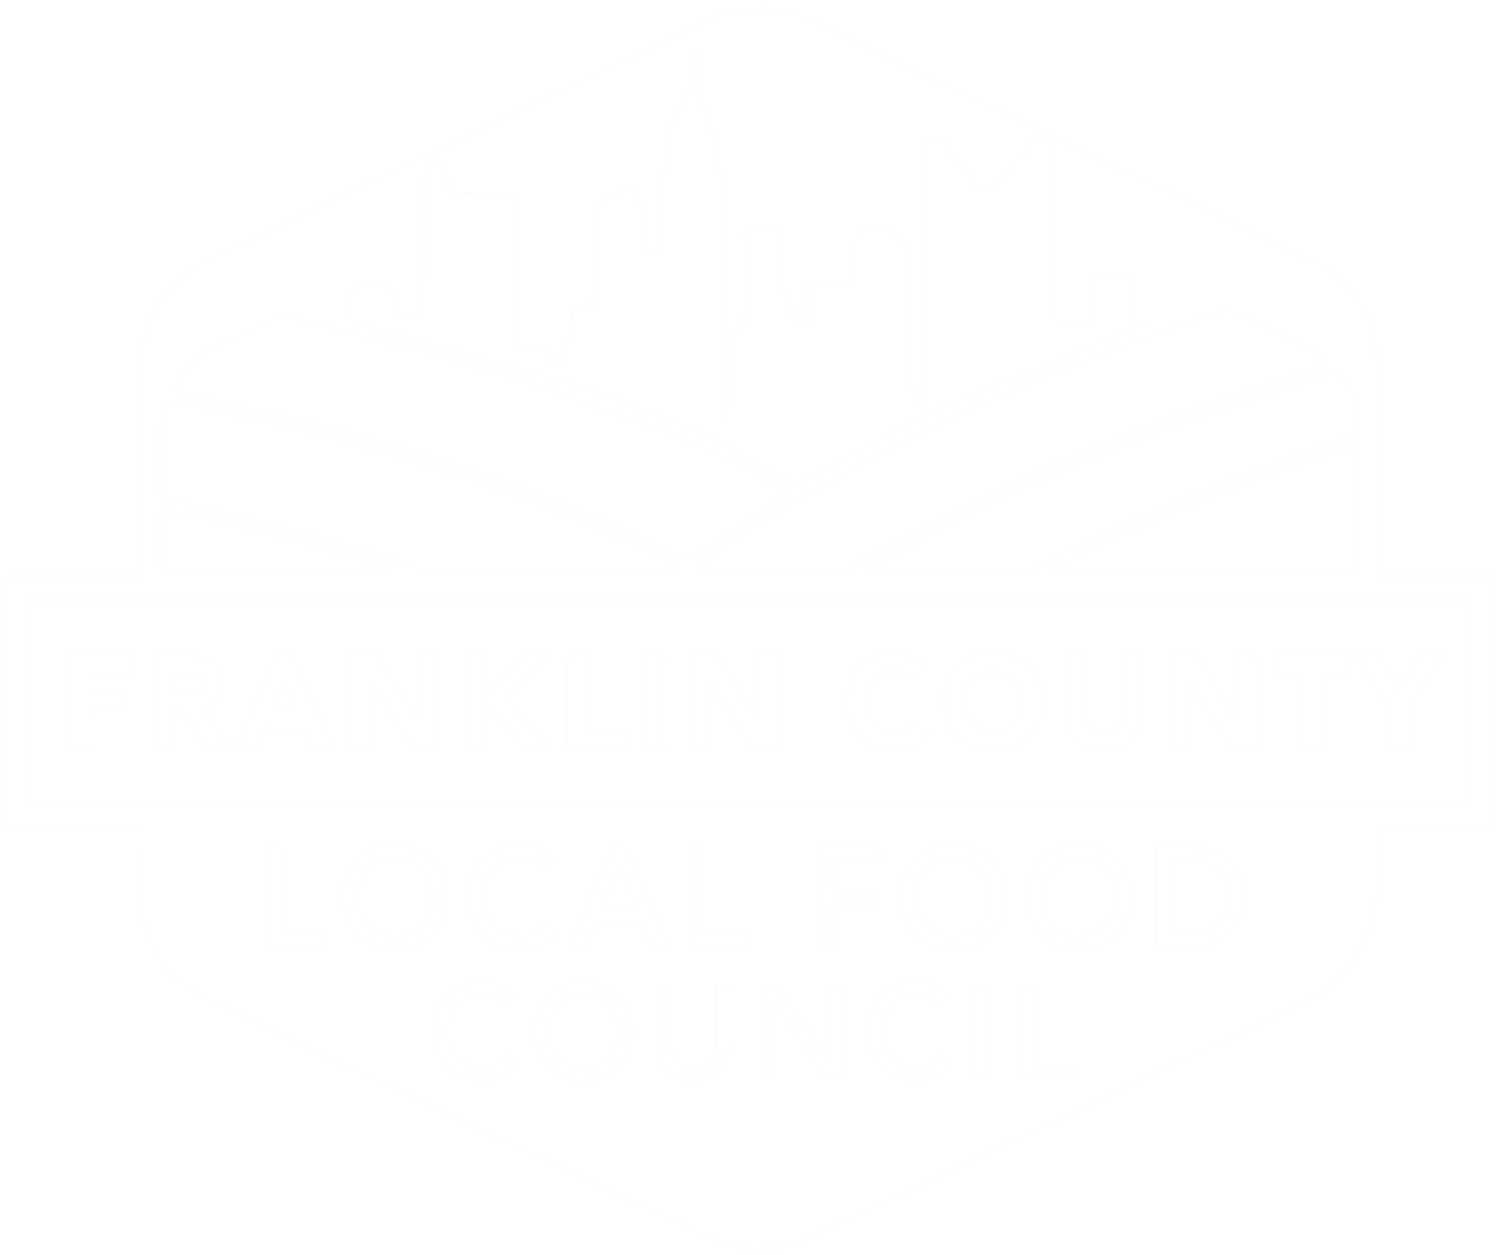 Franklin County Local Food Council